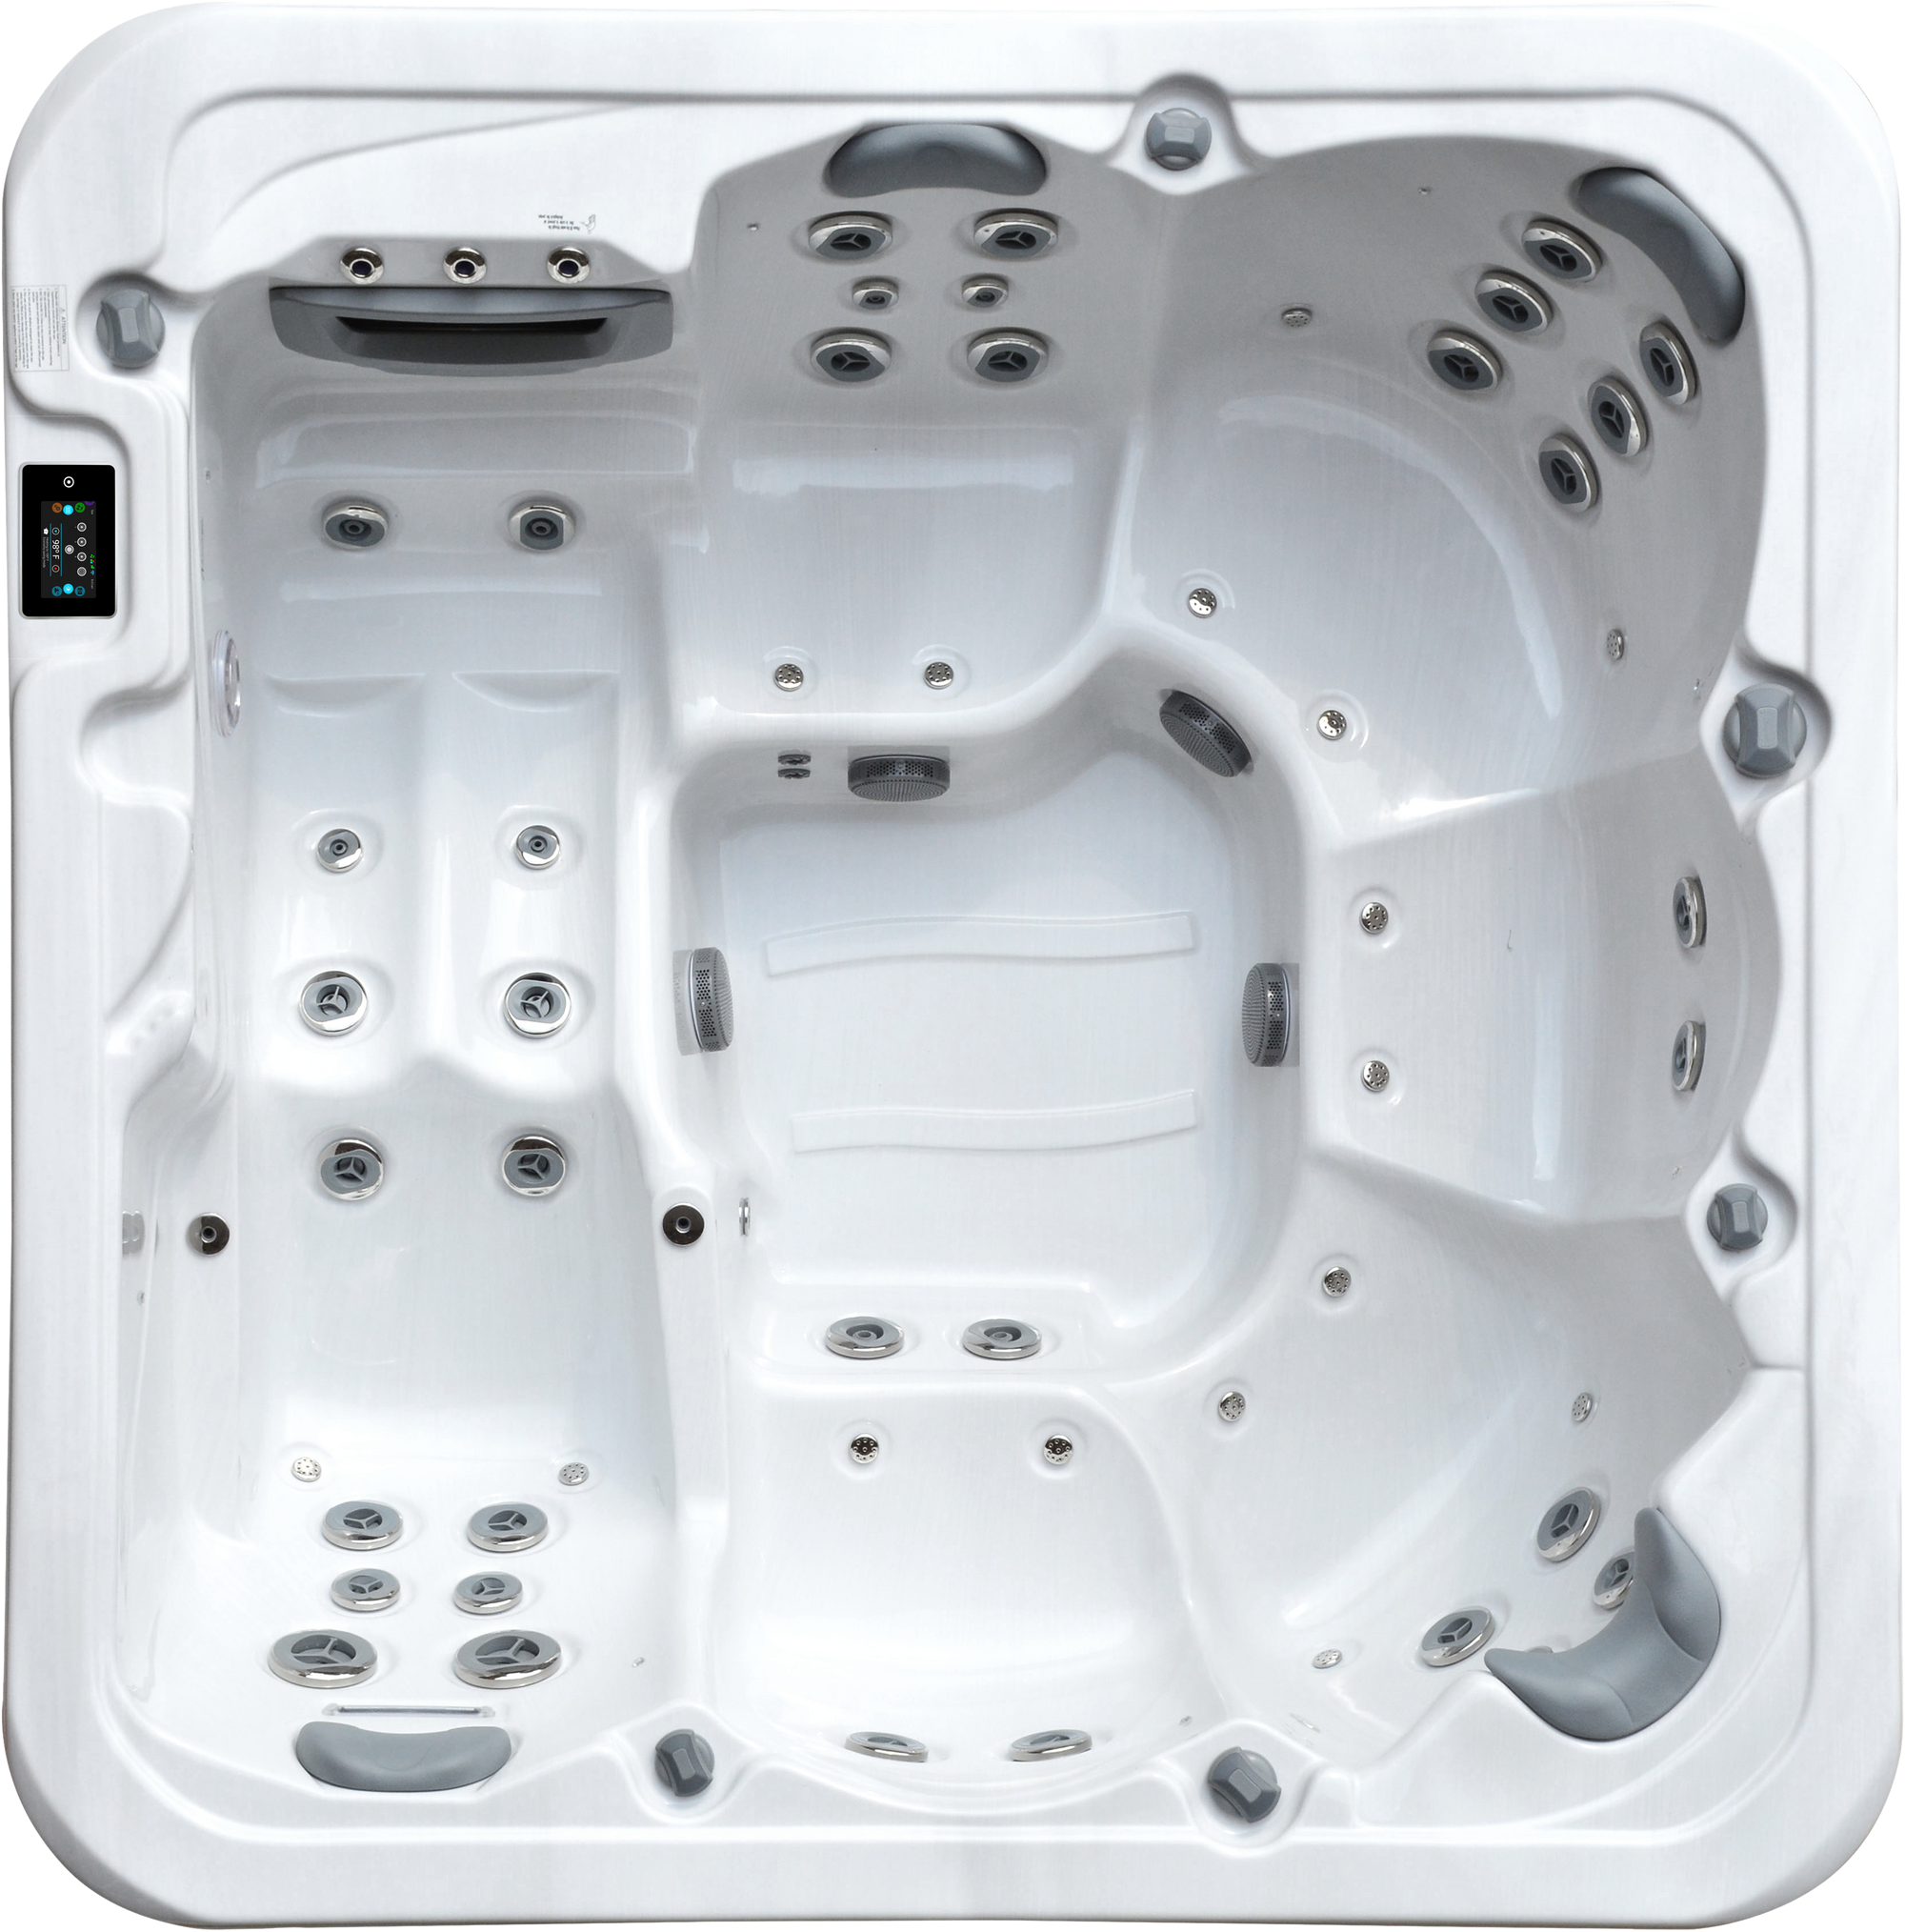 oasis rx-562 hot tub available at hot tub liverpool 